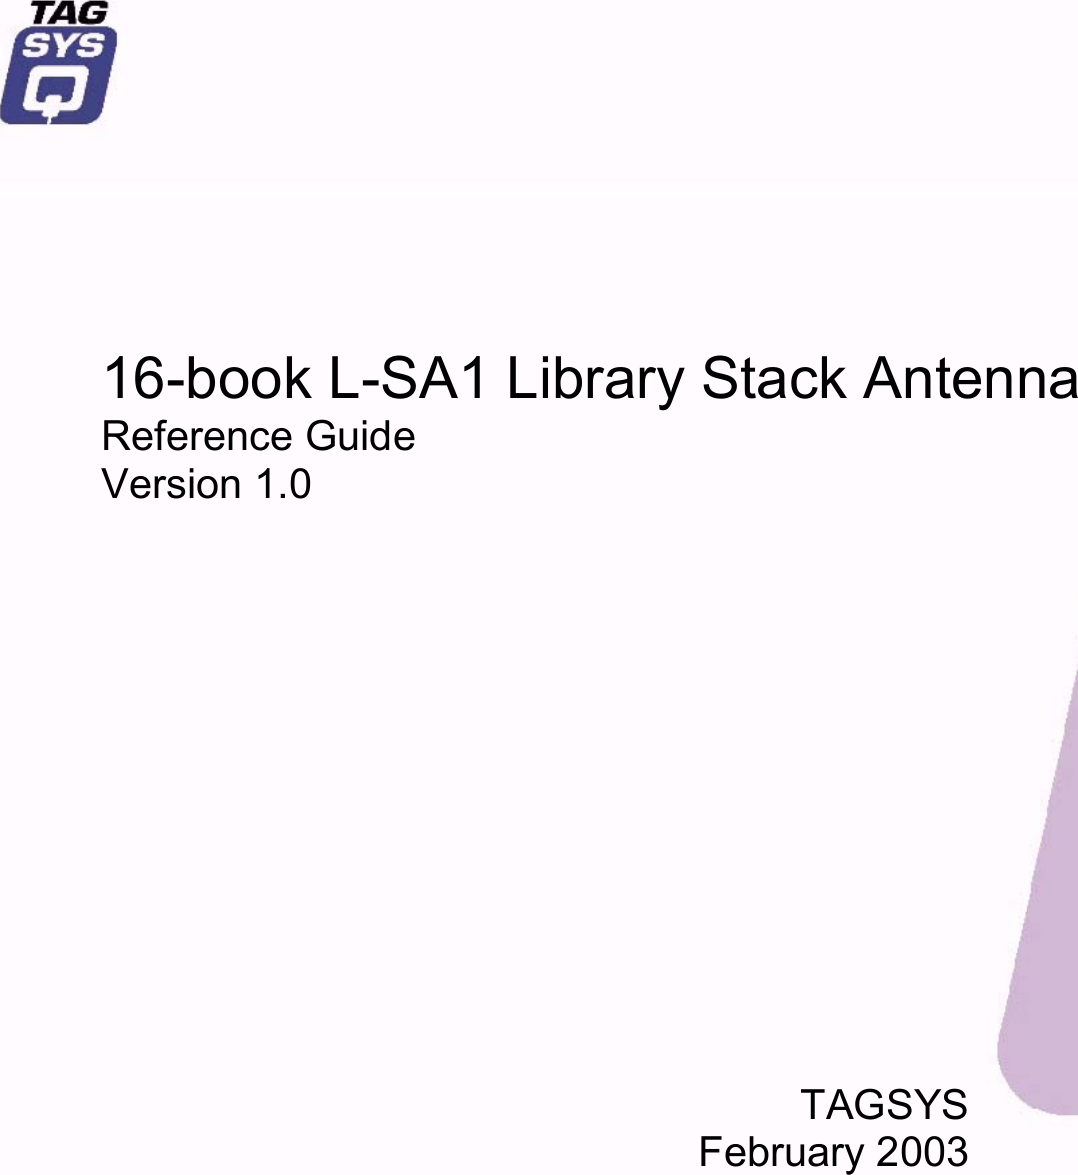   16-book L-SA1 Library Stack Antenna Reference Guide Version 1.0  TAGSYS February 2003       